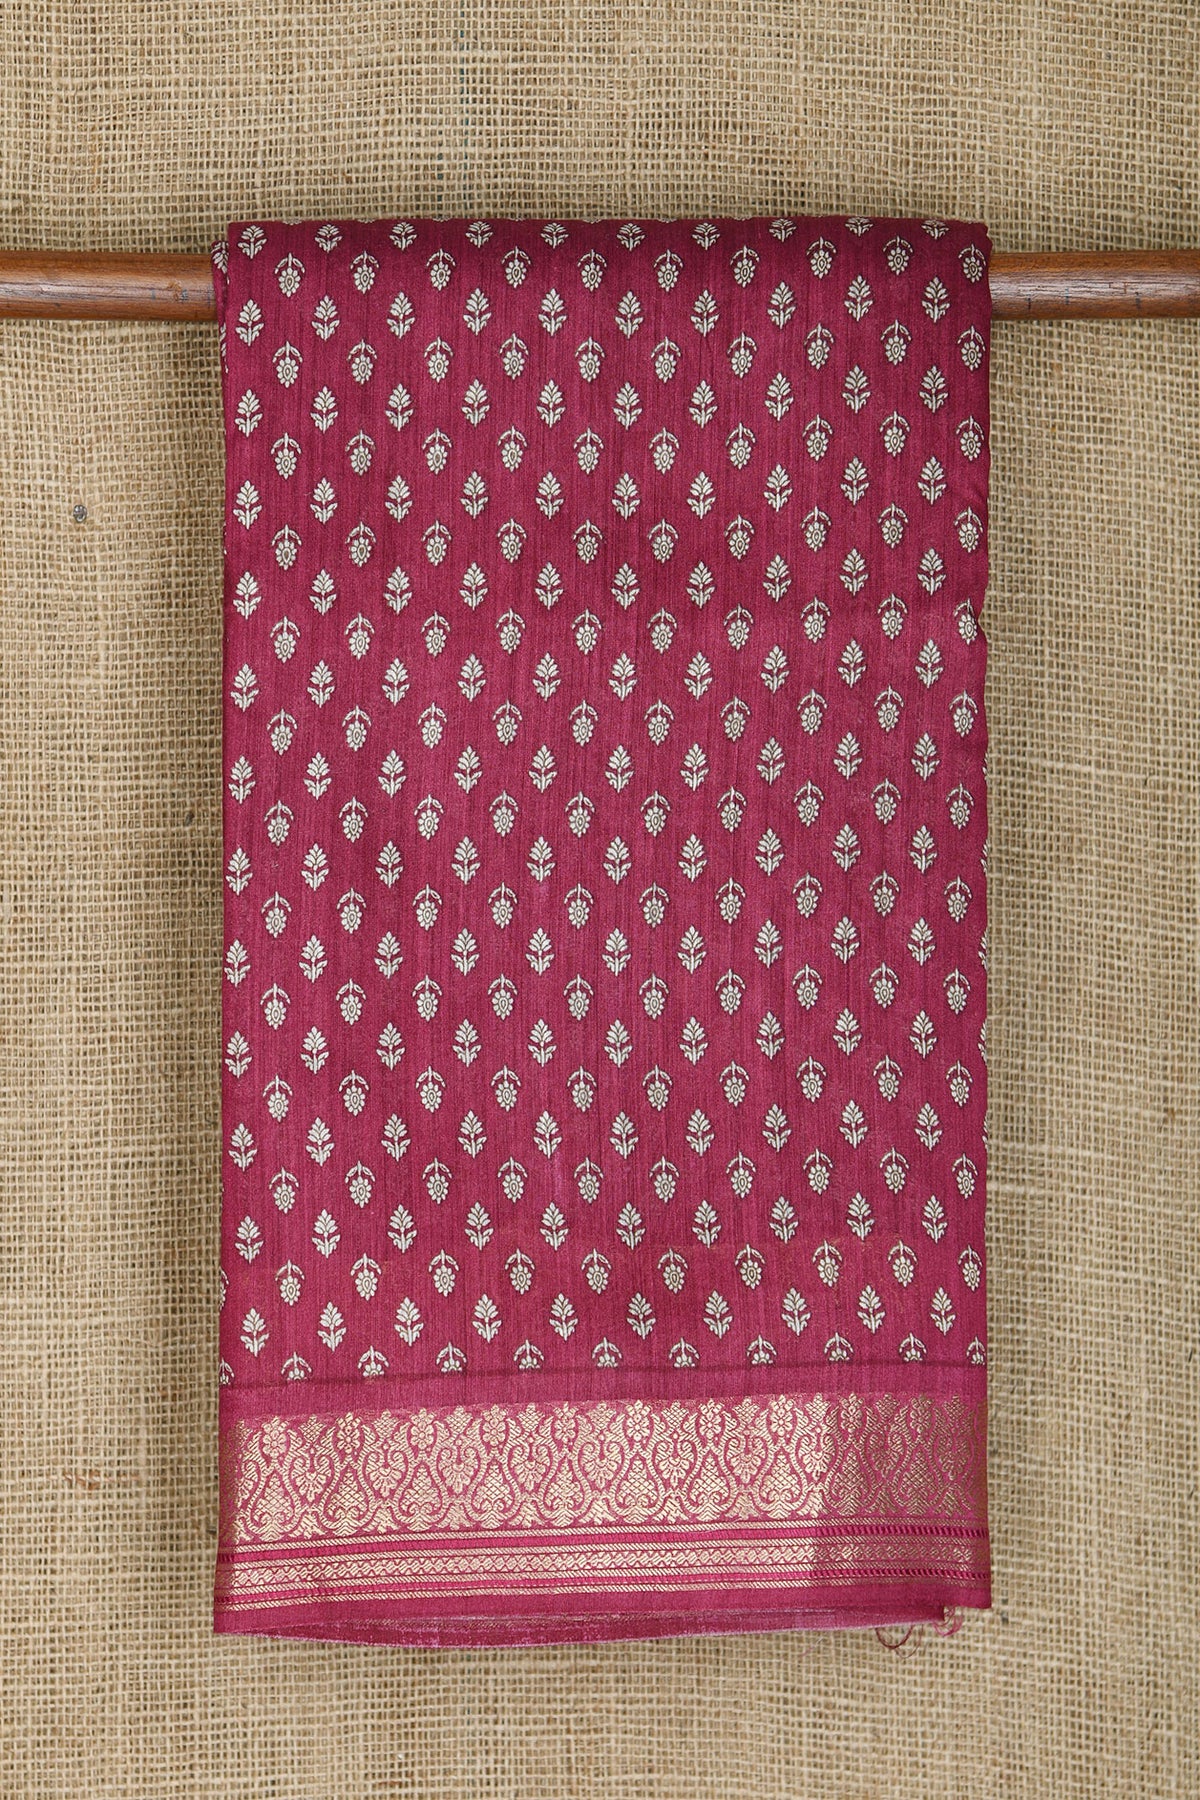 Small Zari Border With Floral Digital Printed Mulberry Pink Soft Tussar Silk Saree